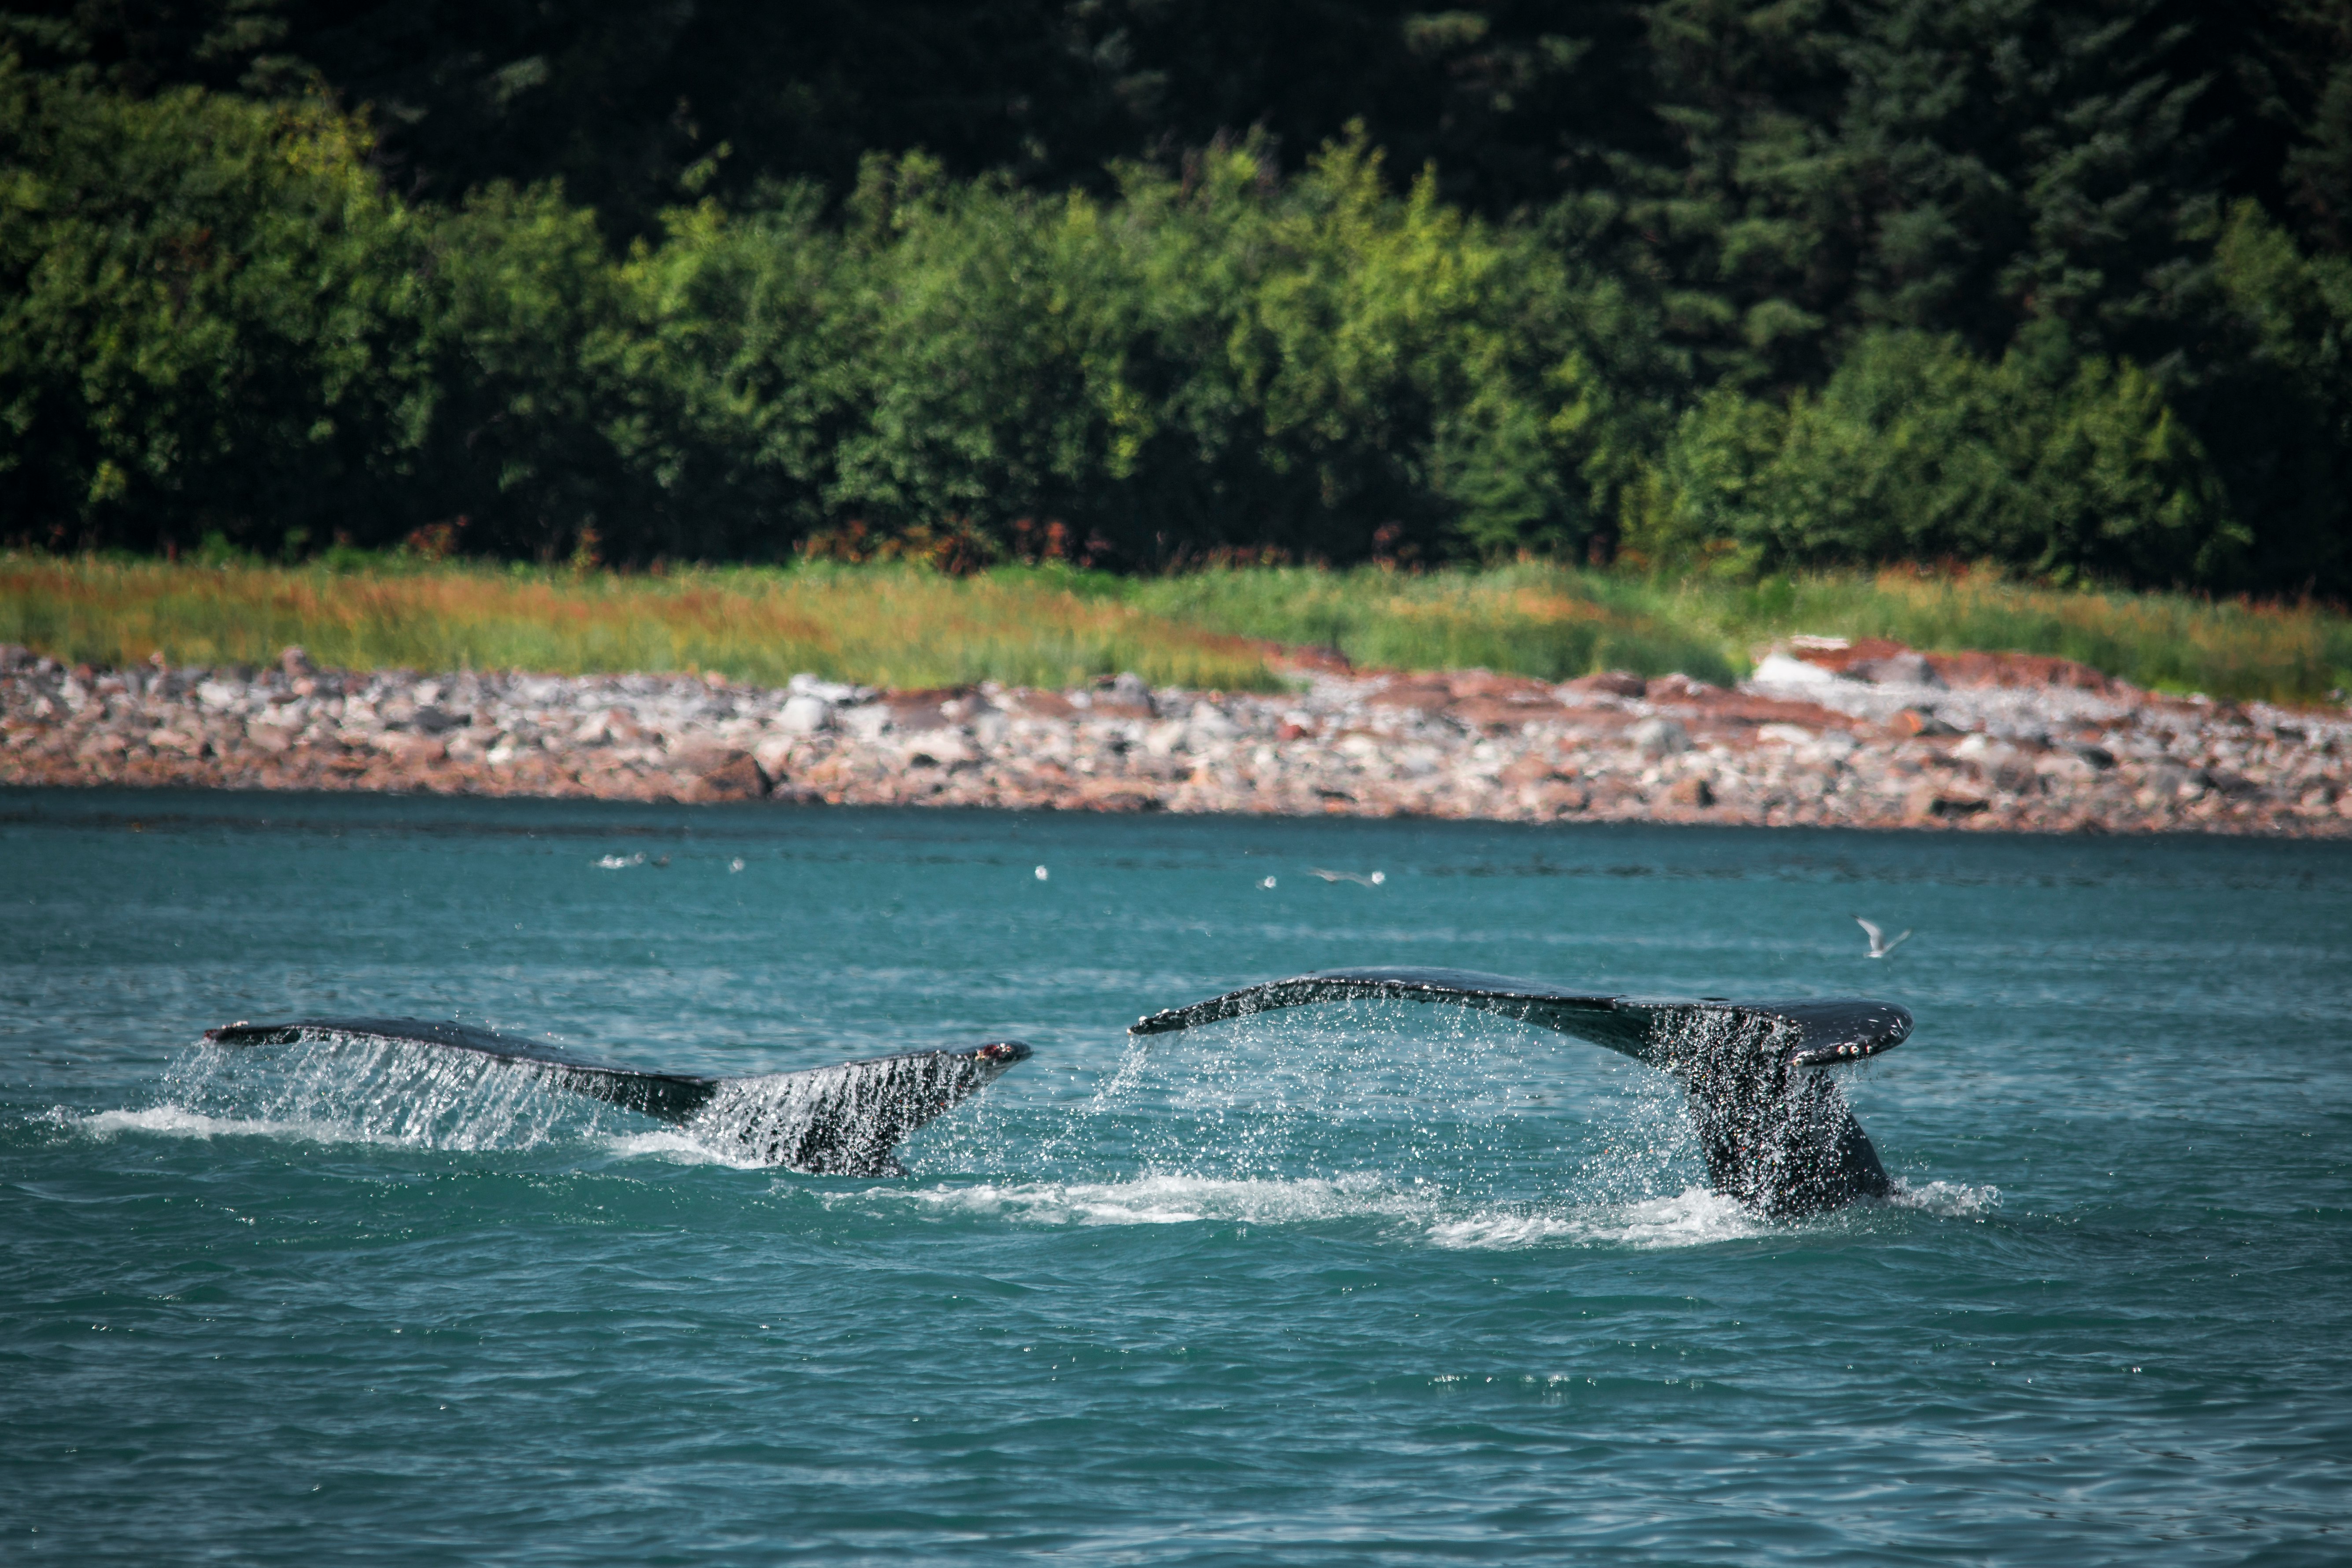 two whales near shoreline during daytime